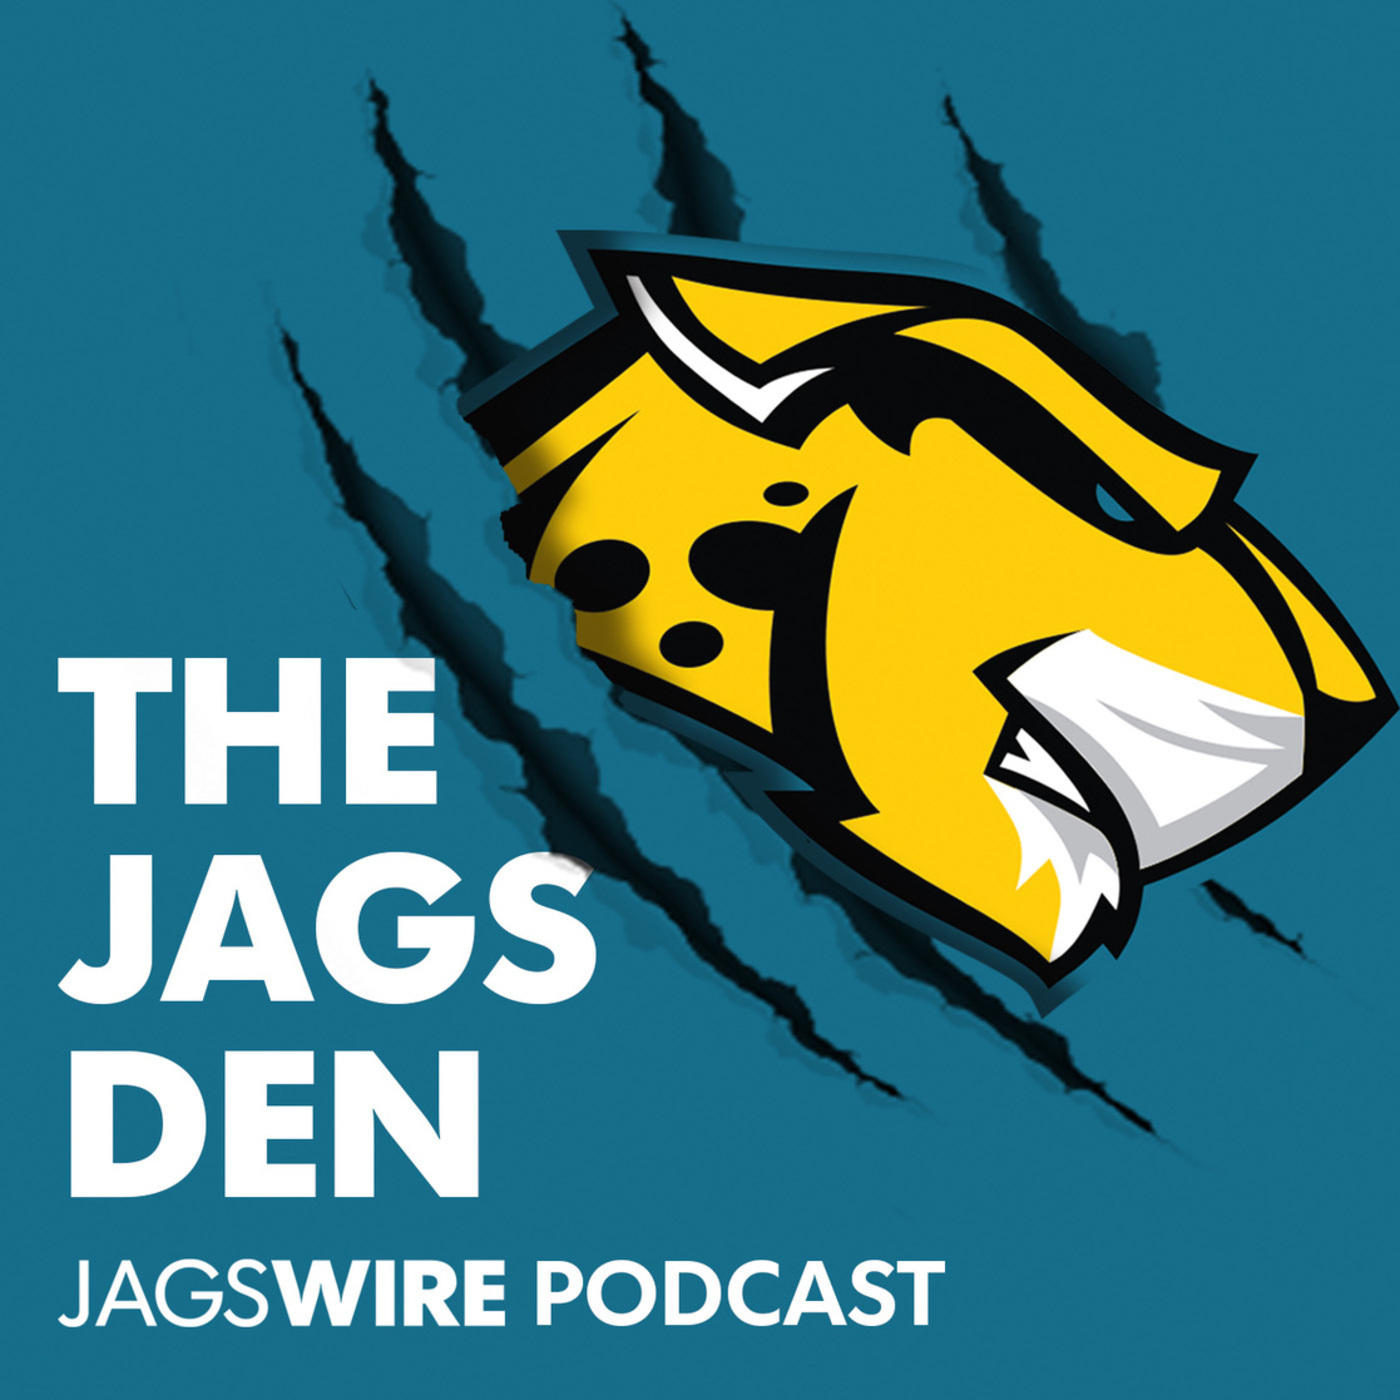 Jags Den Podcast Ep. 20: Discussions on Shad Khan's bid for Wembley, Fournette projections and the Jags' crowded WR corps